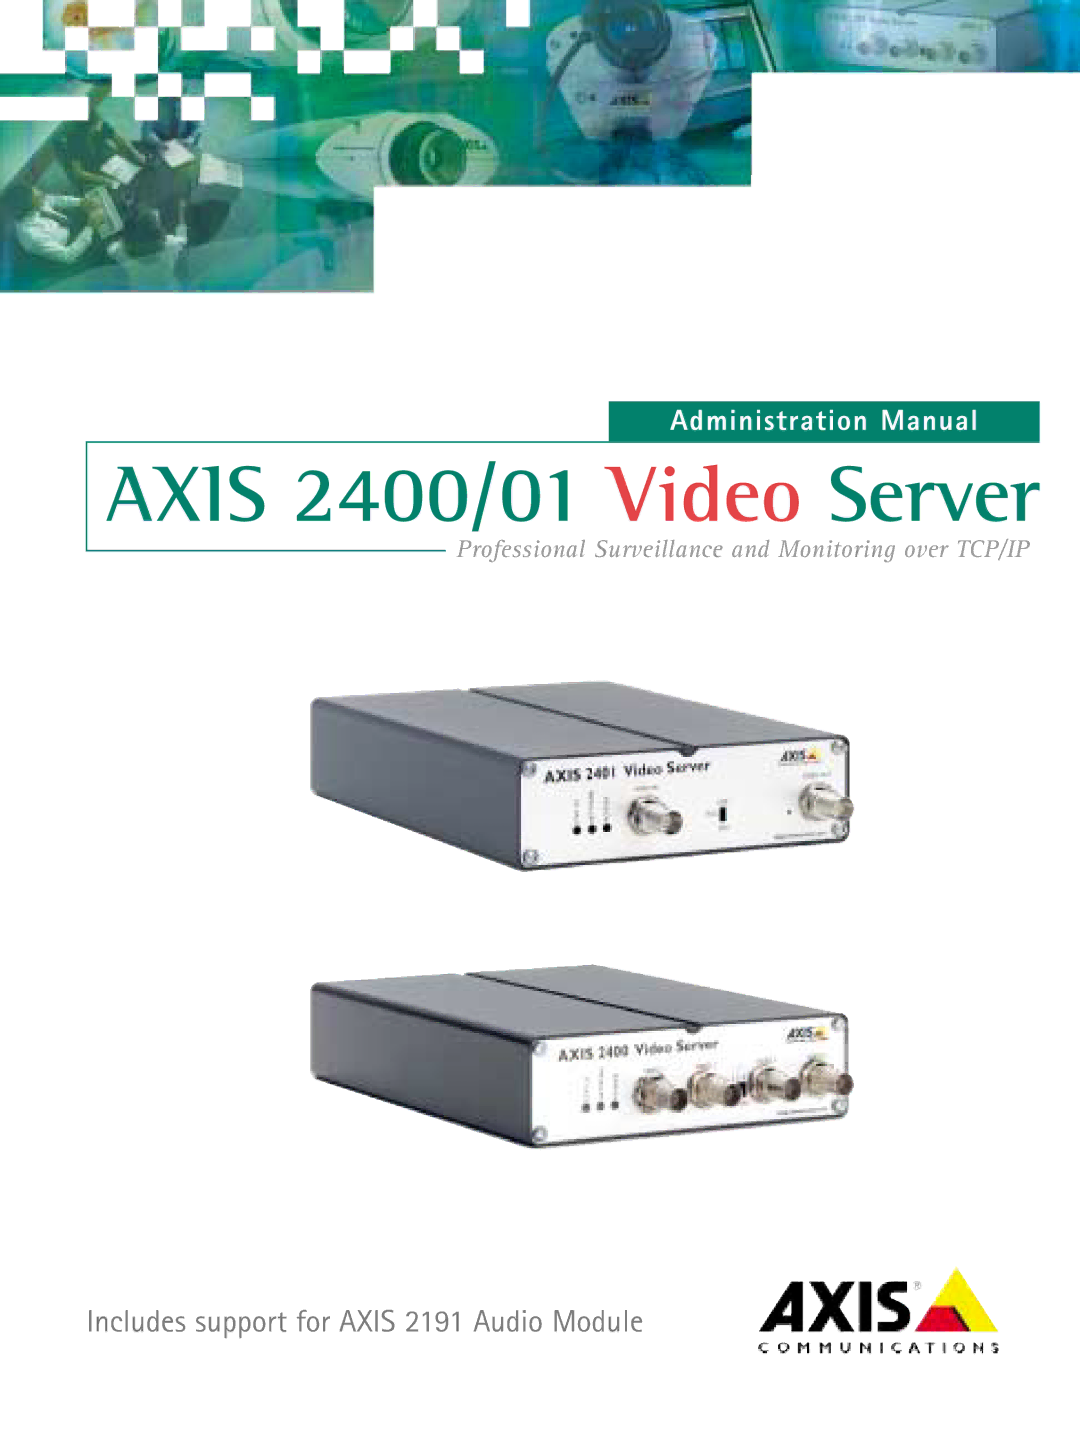 Axis Communications 2401 manual Axis 2400/01 Video Server 